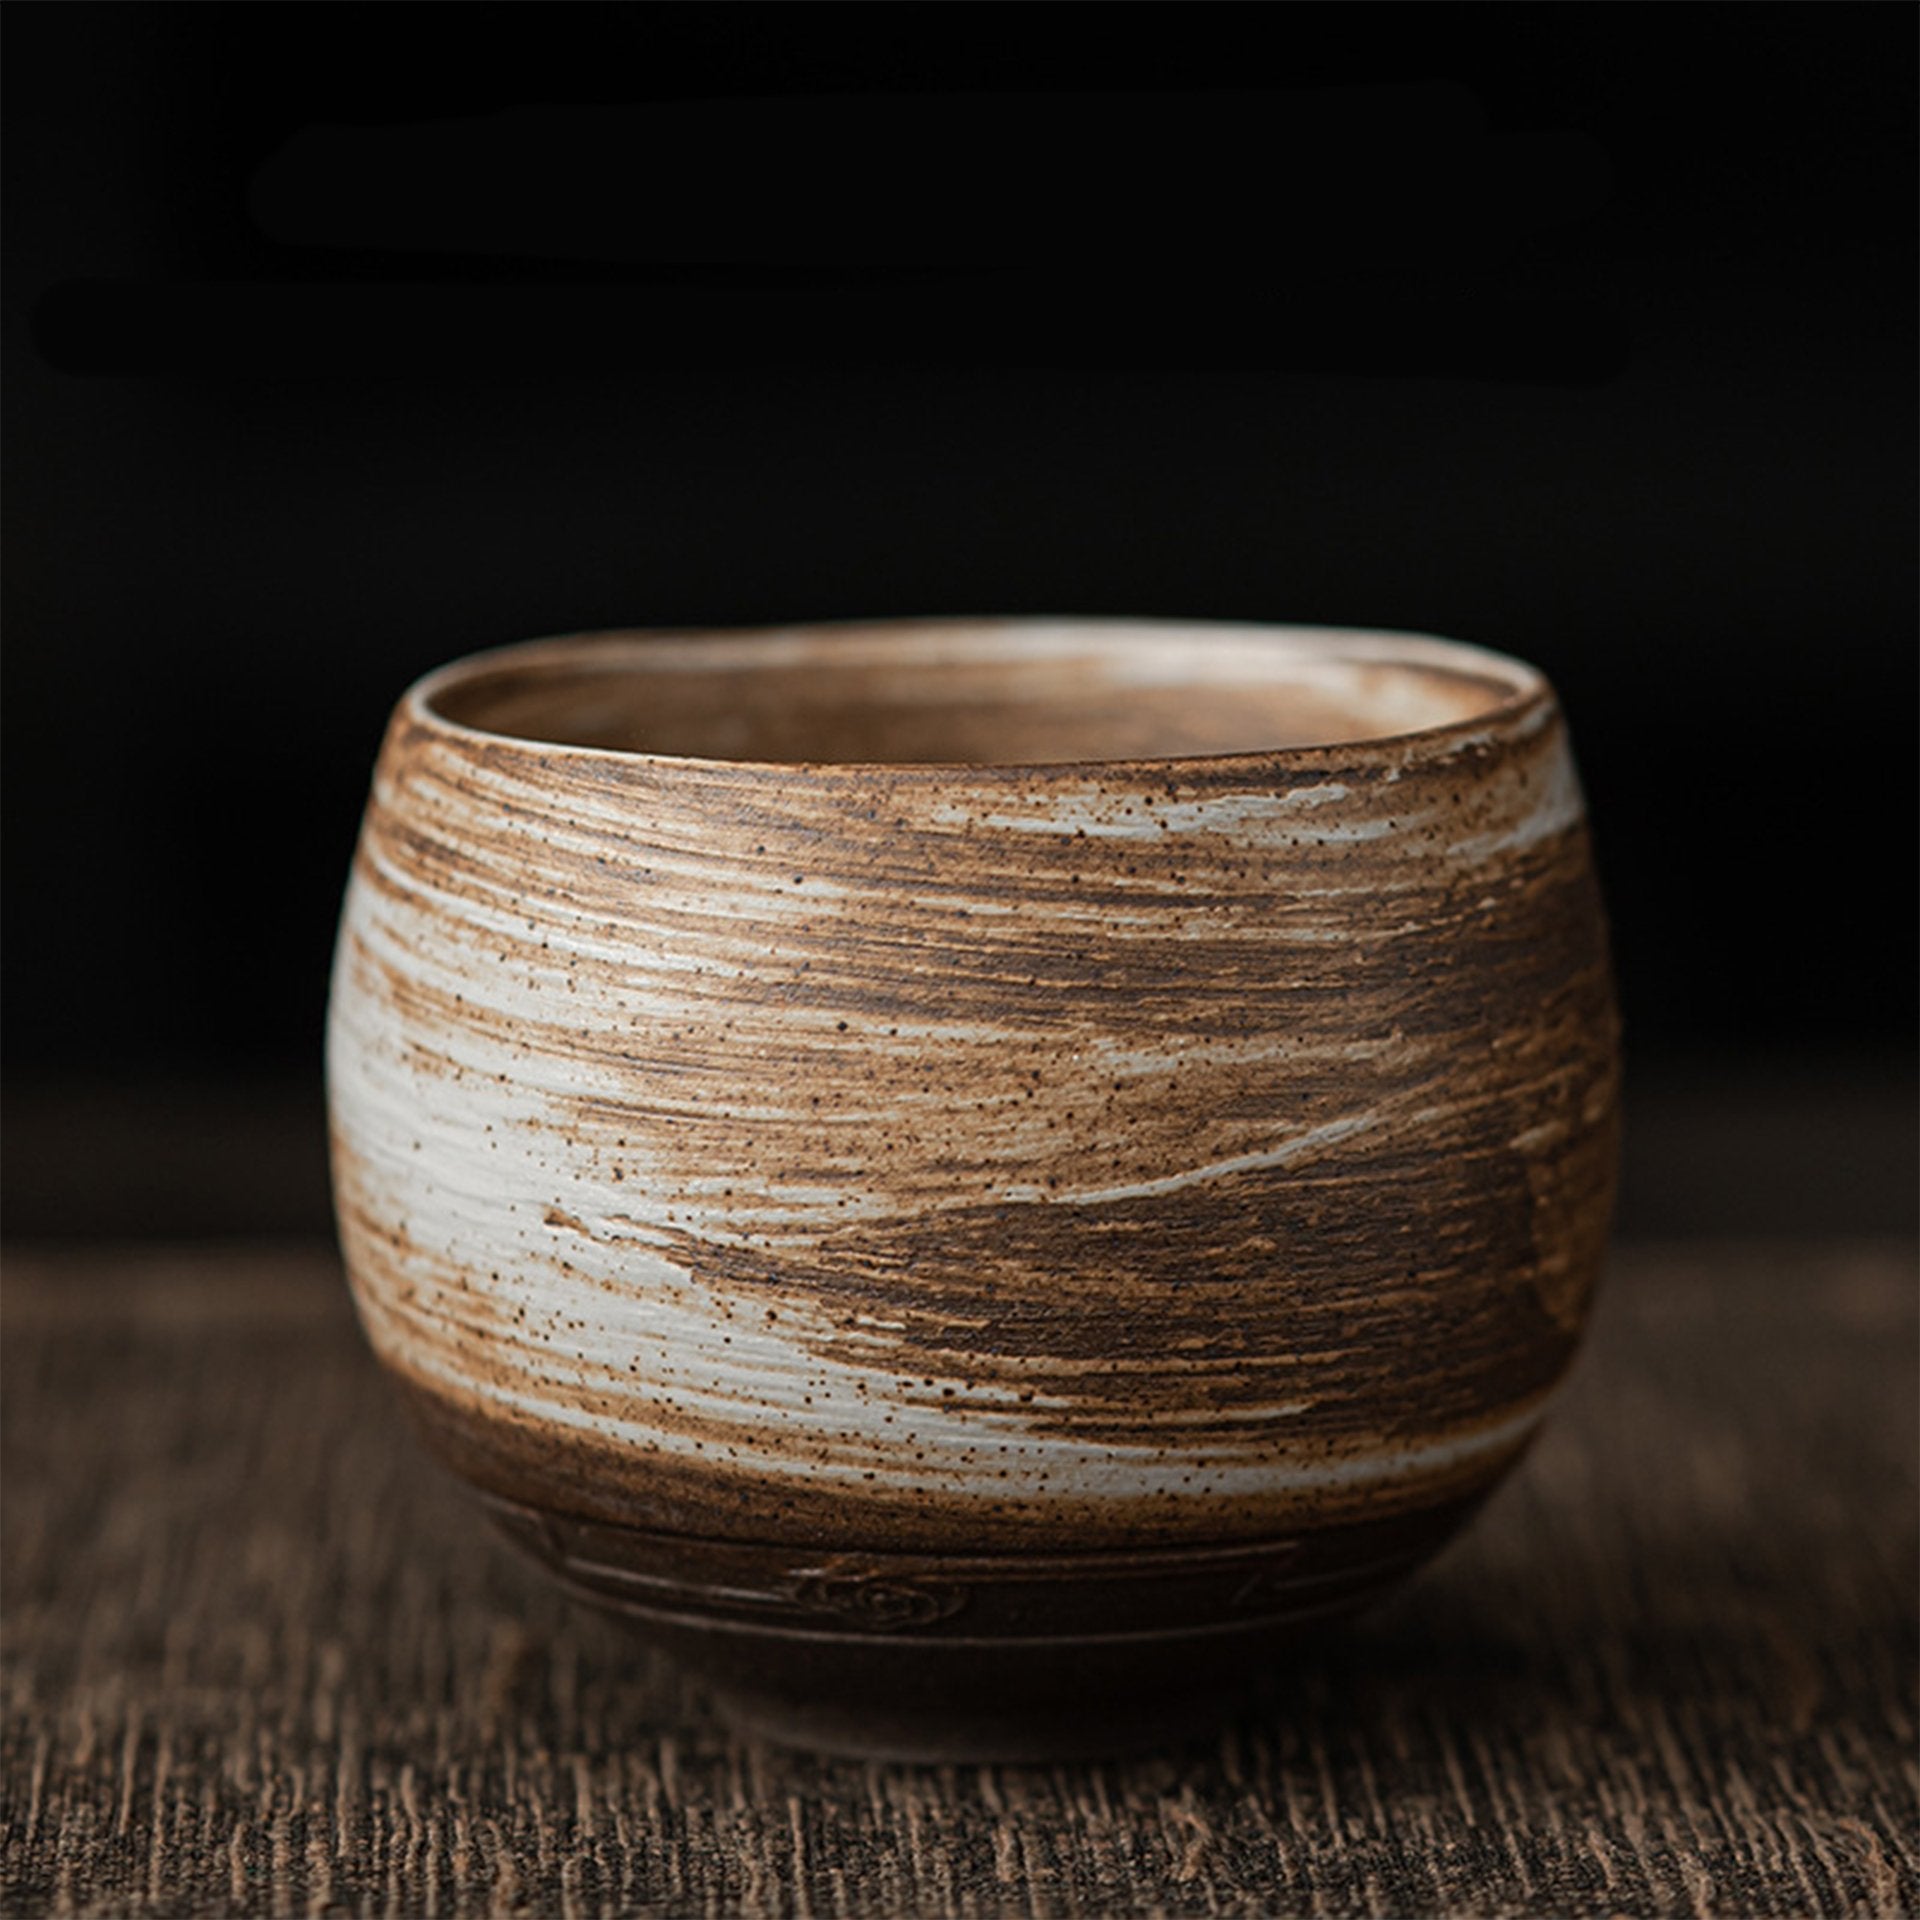 Brown and white striped ceramic tea bowl on wooden surface